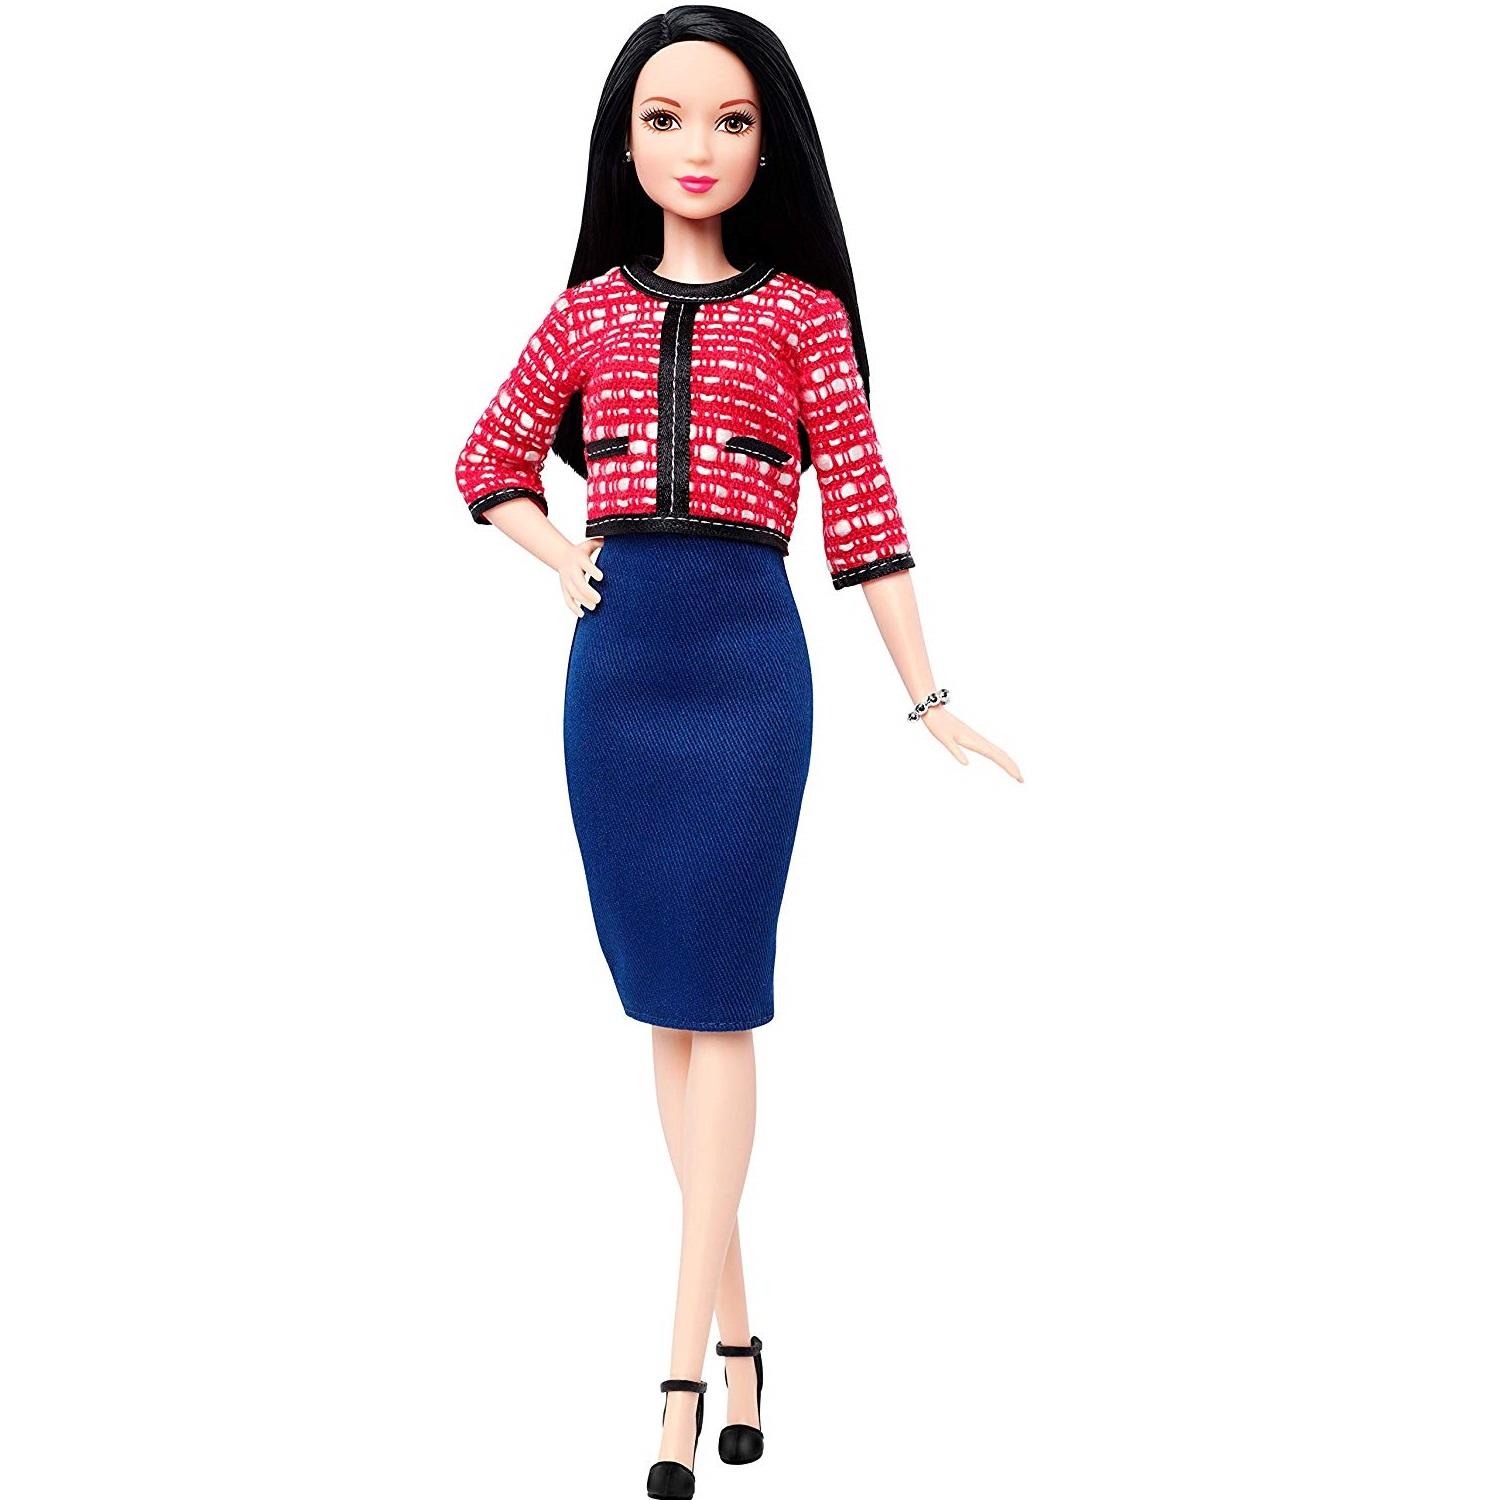 Barbie 60th Anniversary Political Candidate Doll1